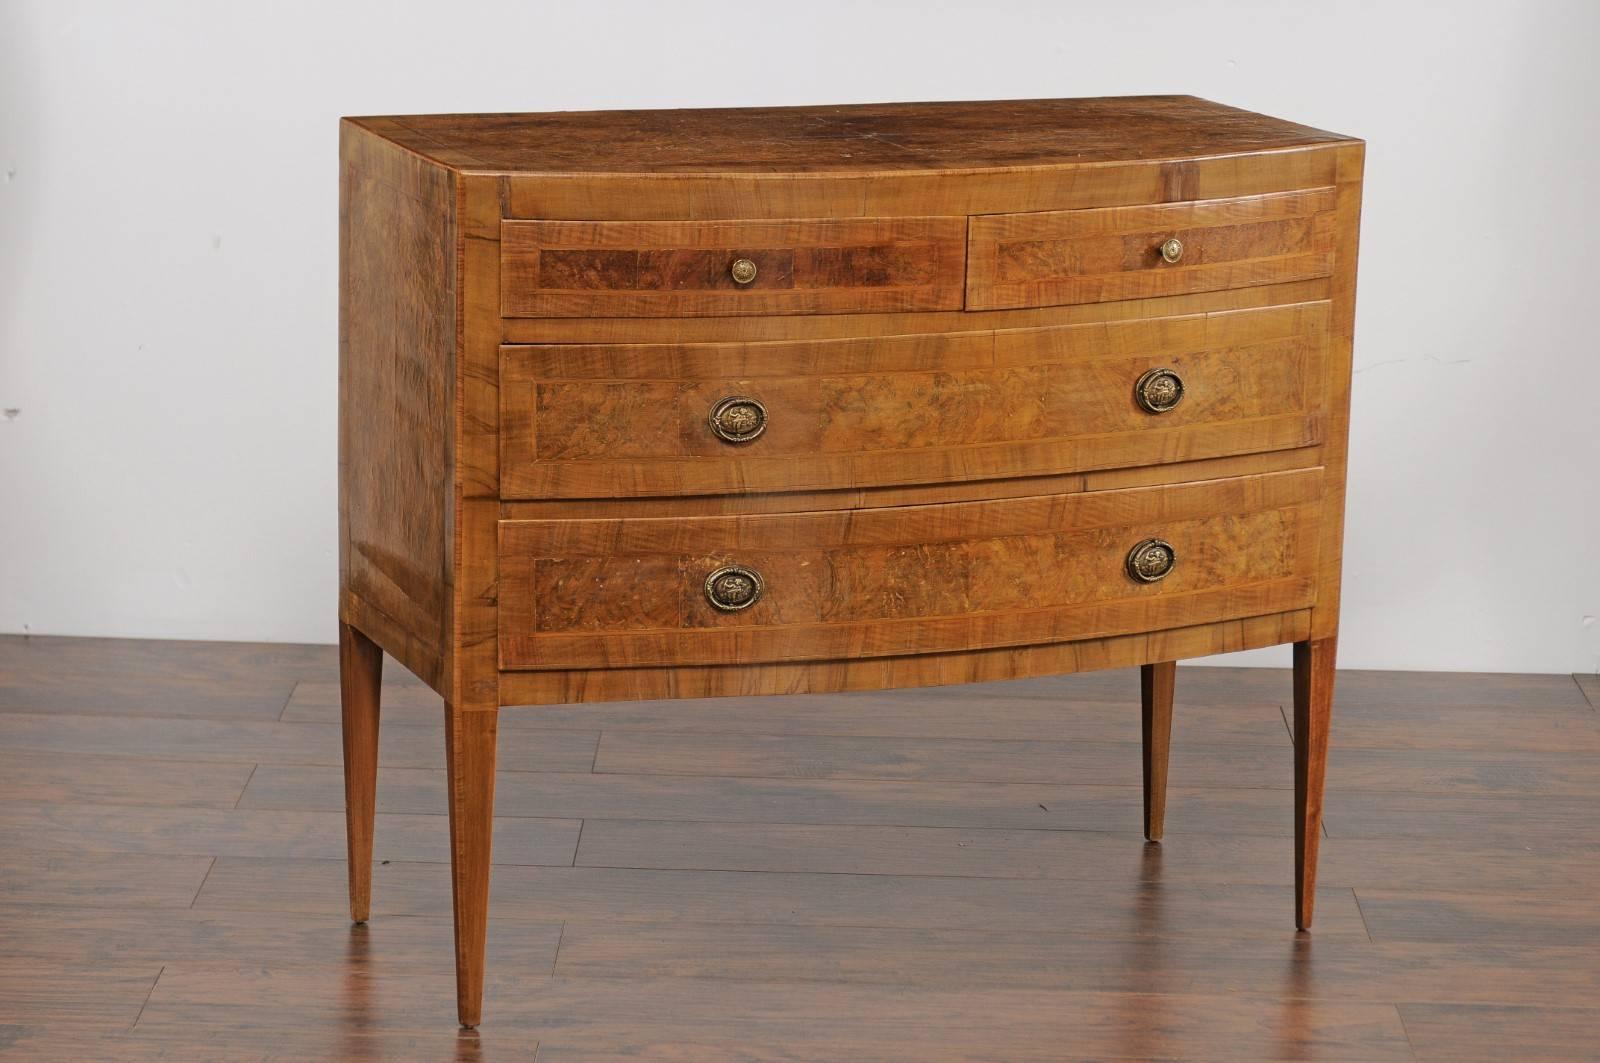 An Italian vintage bow front burl walnut veneered four-drawer commode from the mid-20th century. This Italian commode features an exquisite burl walnut quarter veneered top with crossbanded inlay, sitting above a bow front façade. Two thinner